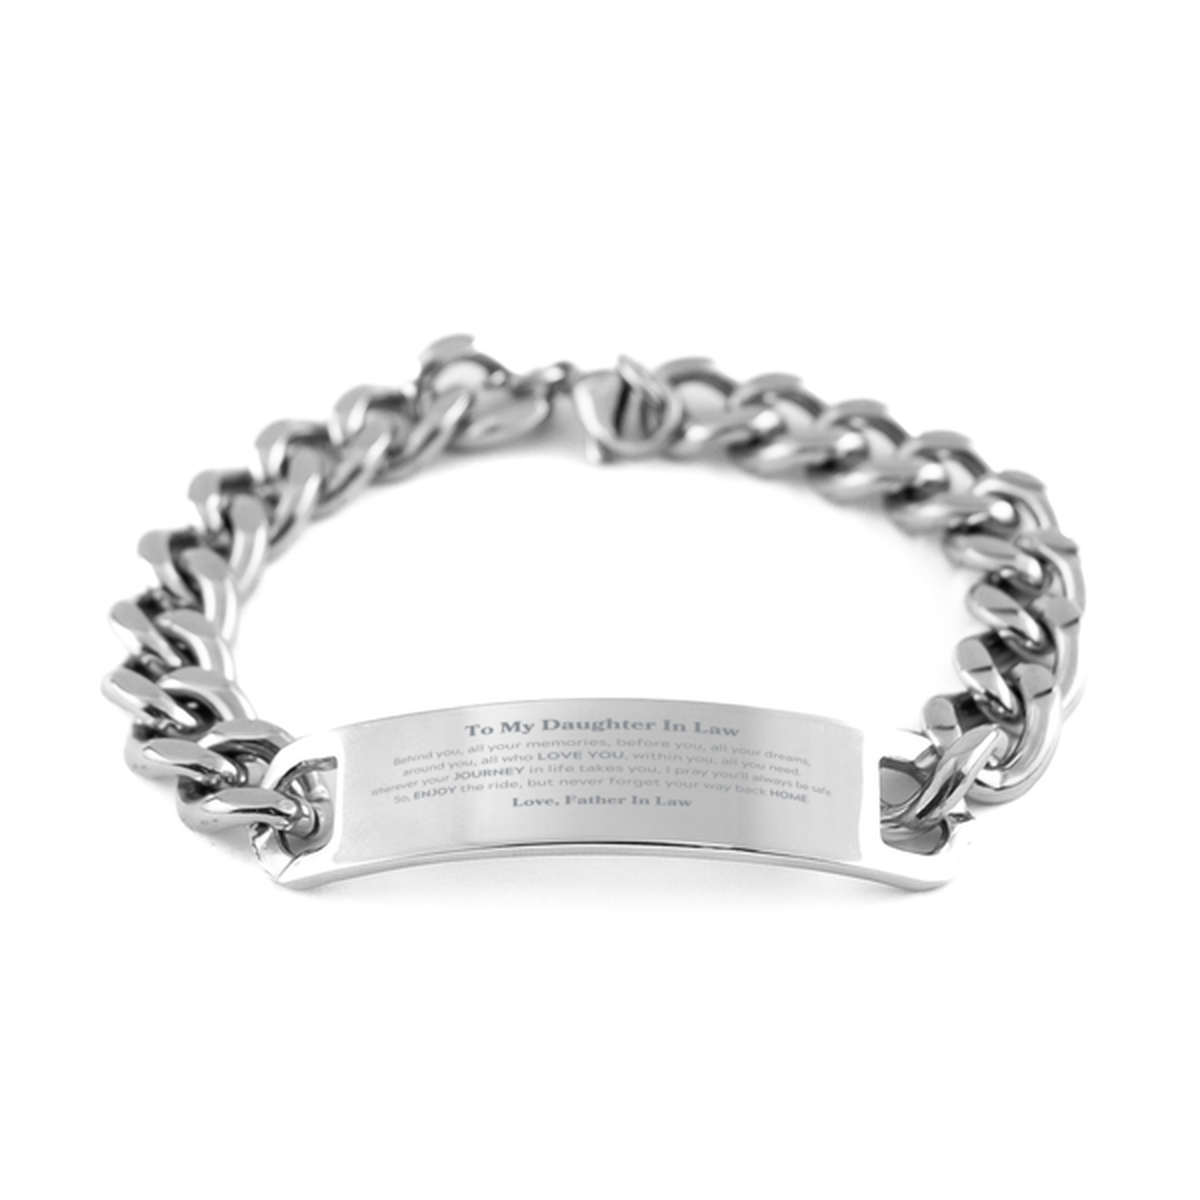 To My Daughter In Law Graduation Gifts from Father In Law, Daughter In Law Cuban Chain Stainless Steel Bracelet Christmas Birthday Gifts for Daughter In Law Behind you, all your memories, before you, all your dreams. Love, Father In Law